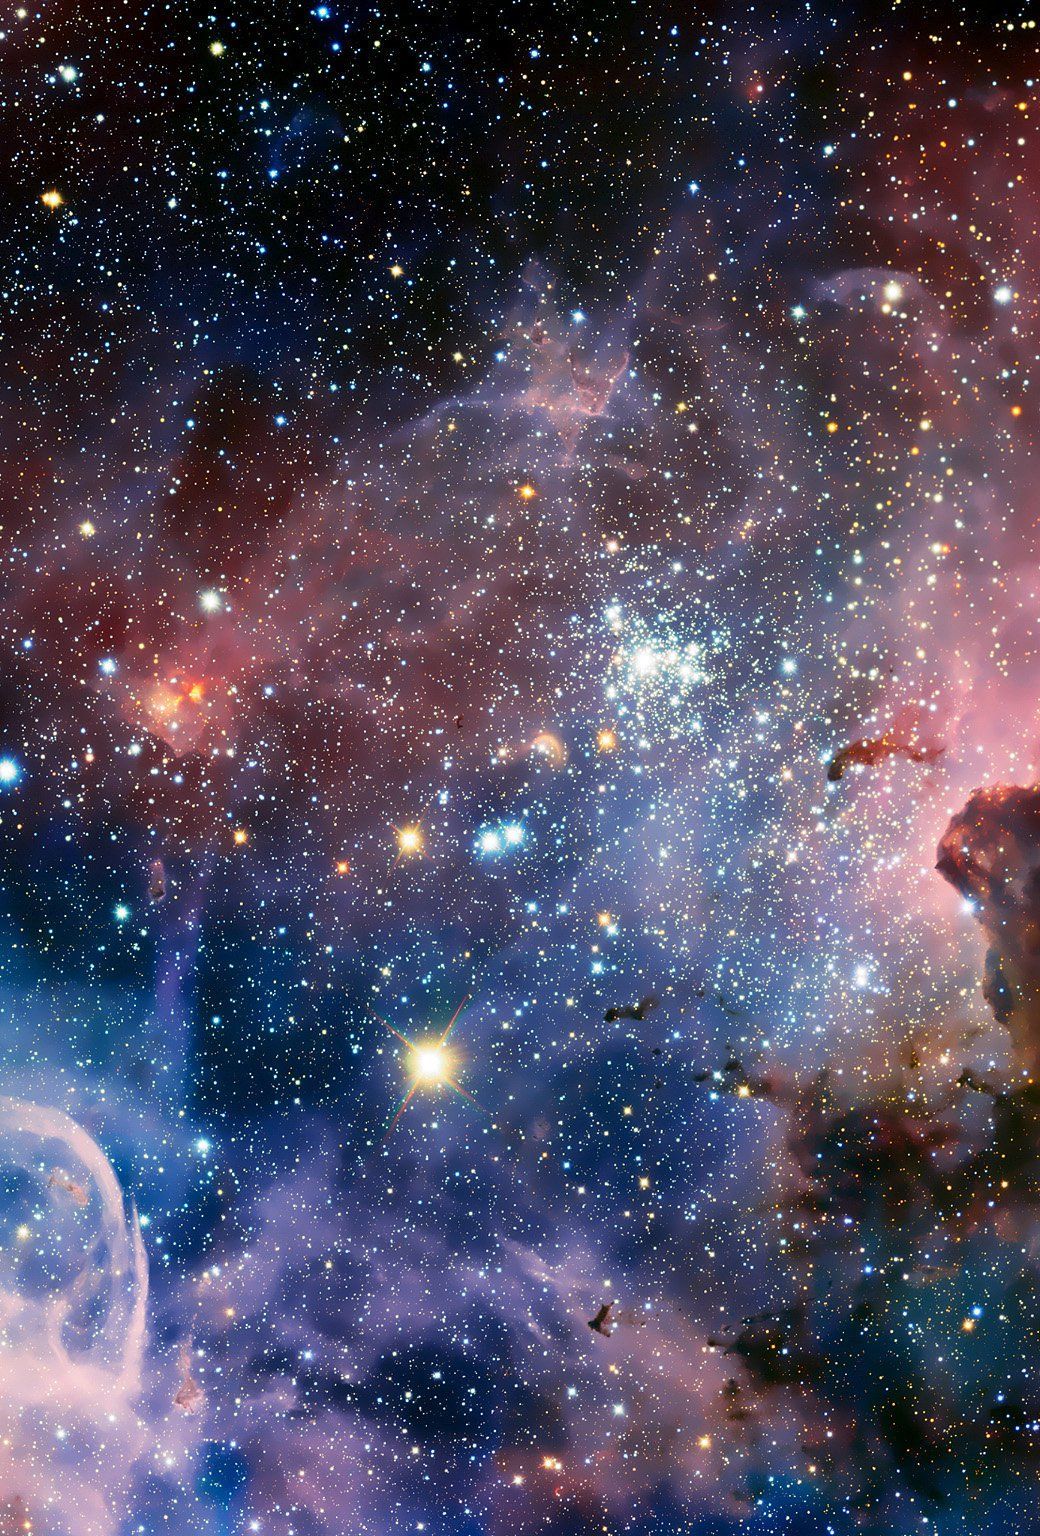 HD Space Wallpaper IPhone